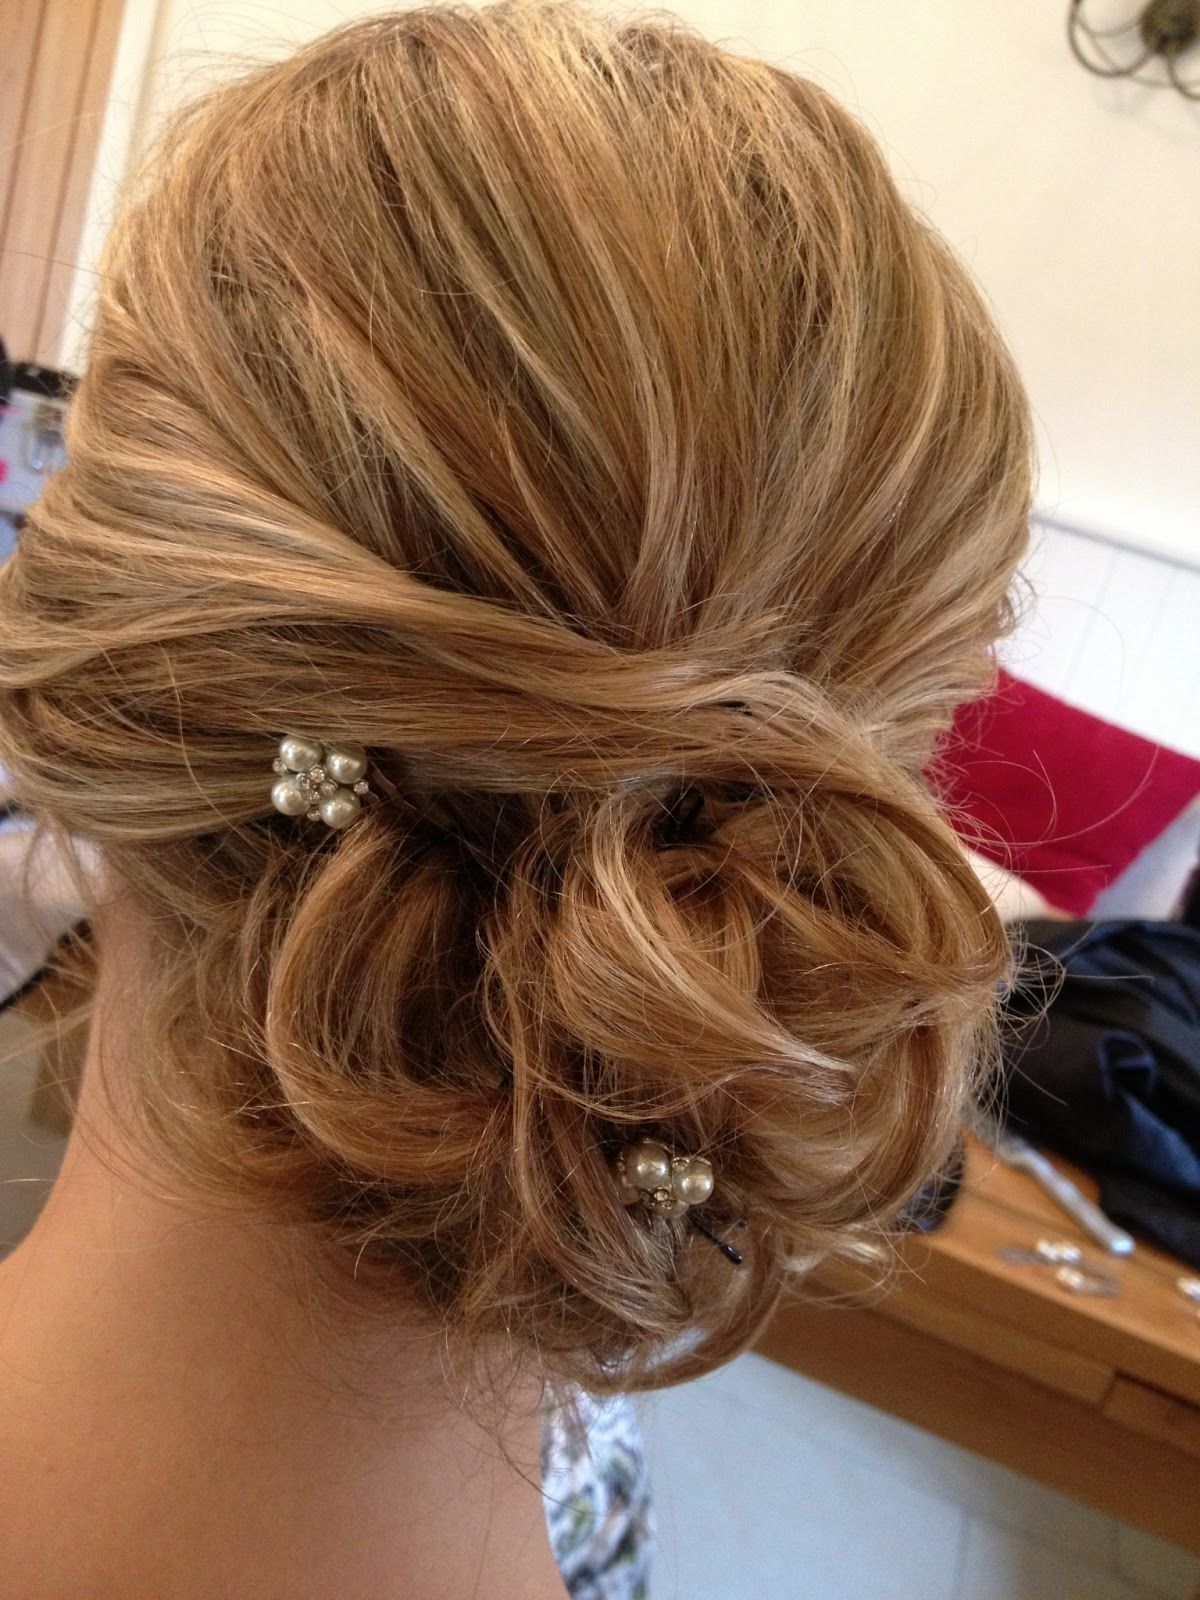 Showing Pic Gallery For > Wedding Hairstyles Side Bun With Flower With Regard To Latest Curly Side Bun Wedding Hairstyles (View 1 of 15)